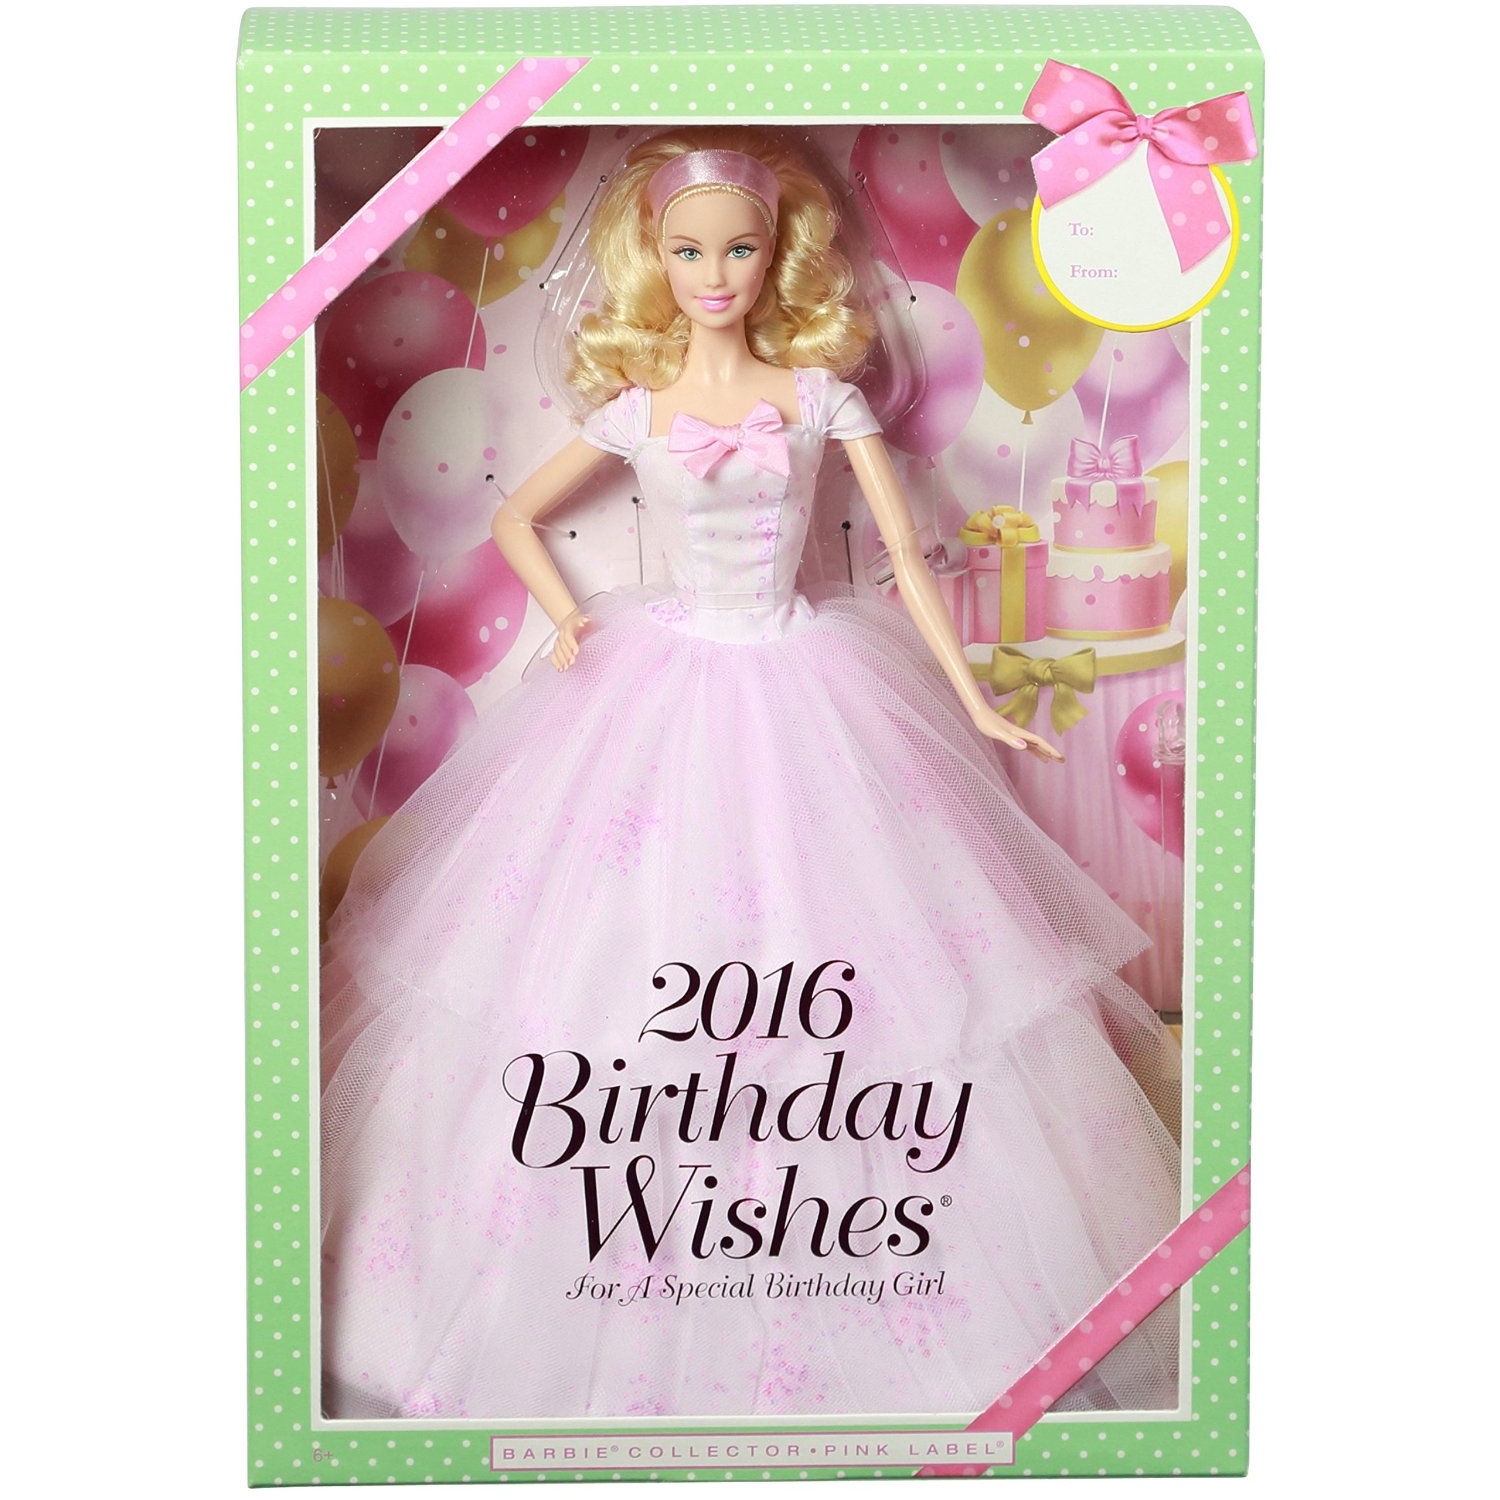 2016 Barbie Doll Birthday Wishes Only $14.99 on Amazon!